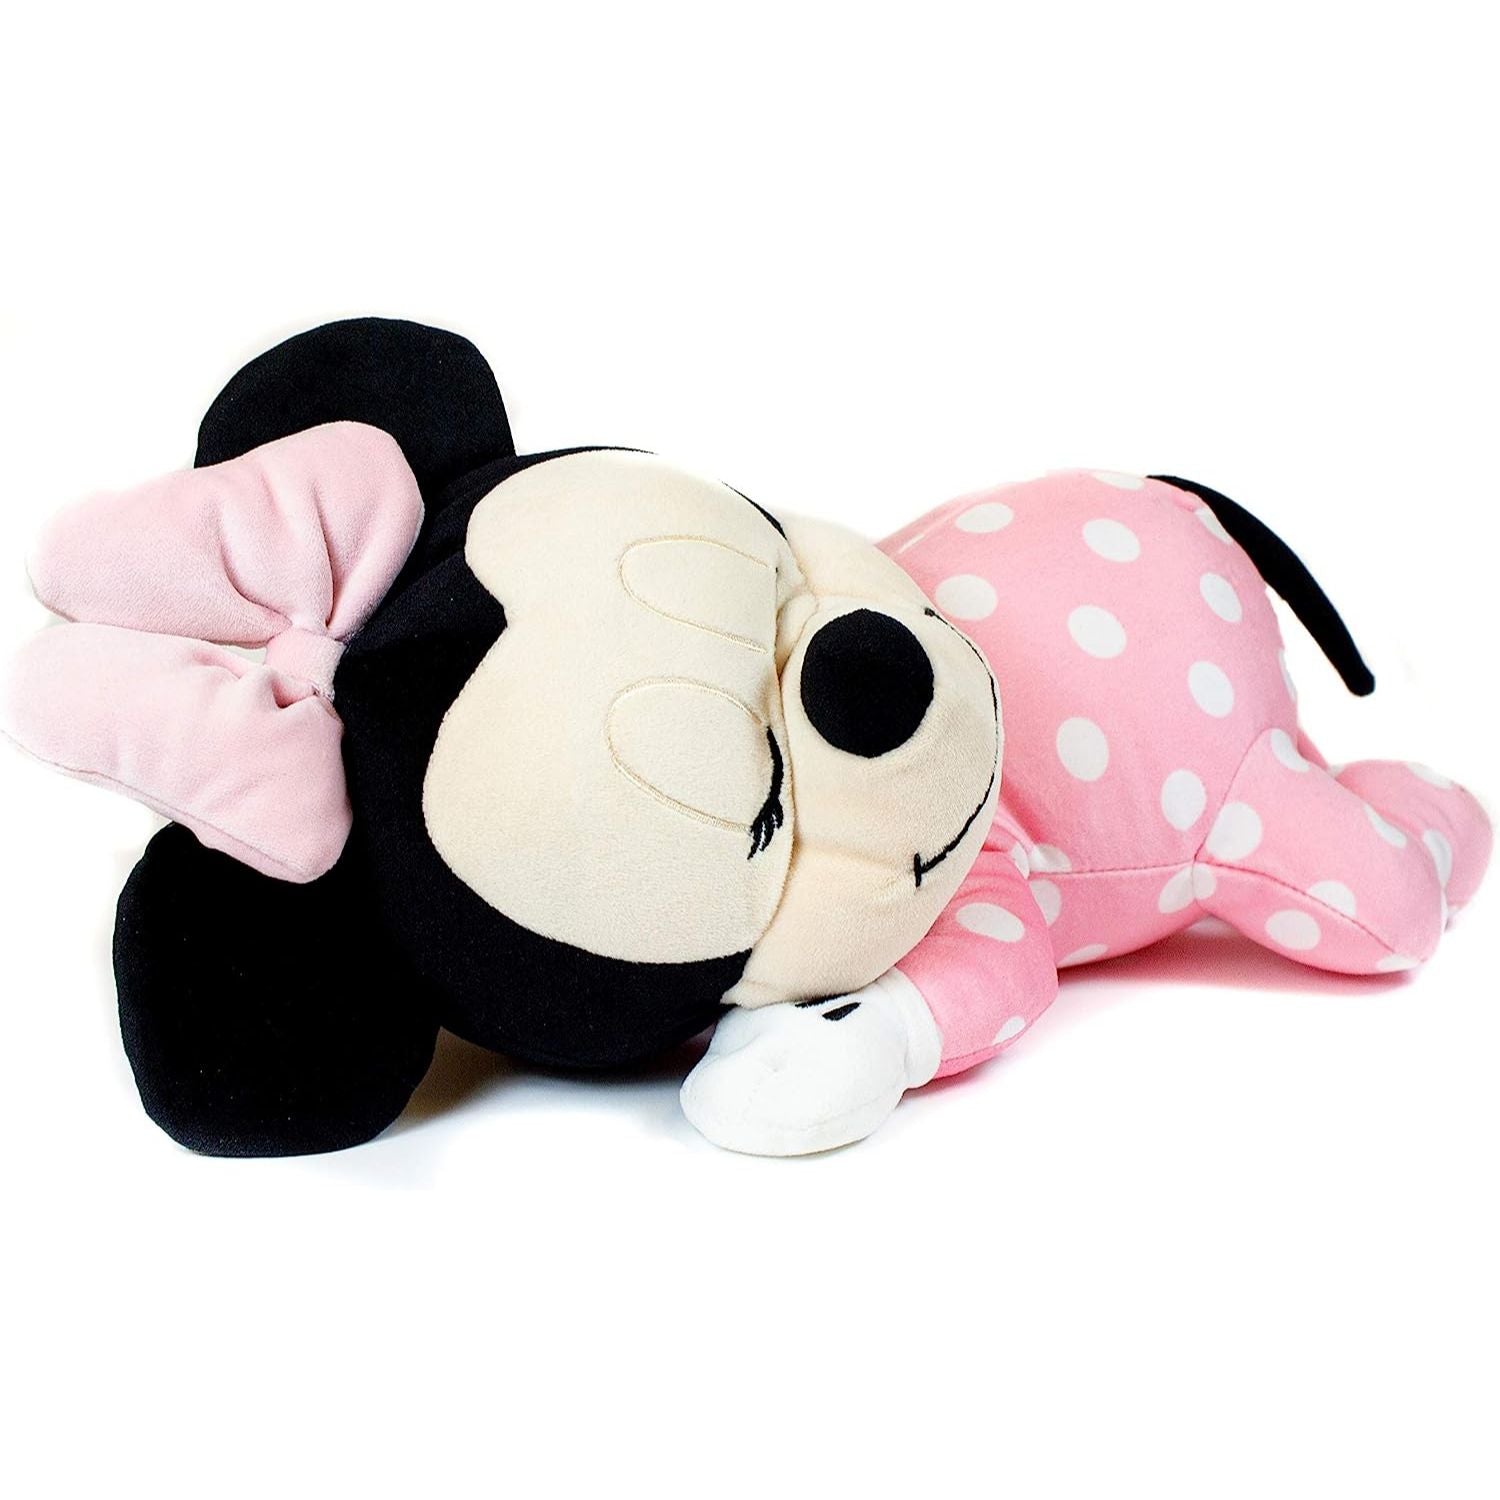 Minnie mouse sleeping plush face view - Heretoserveyou